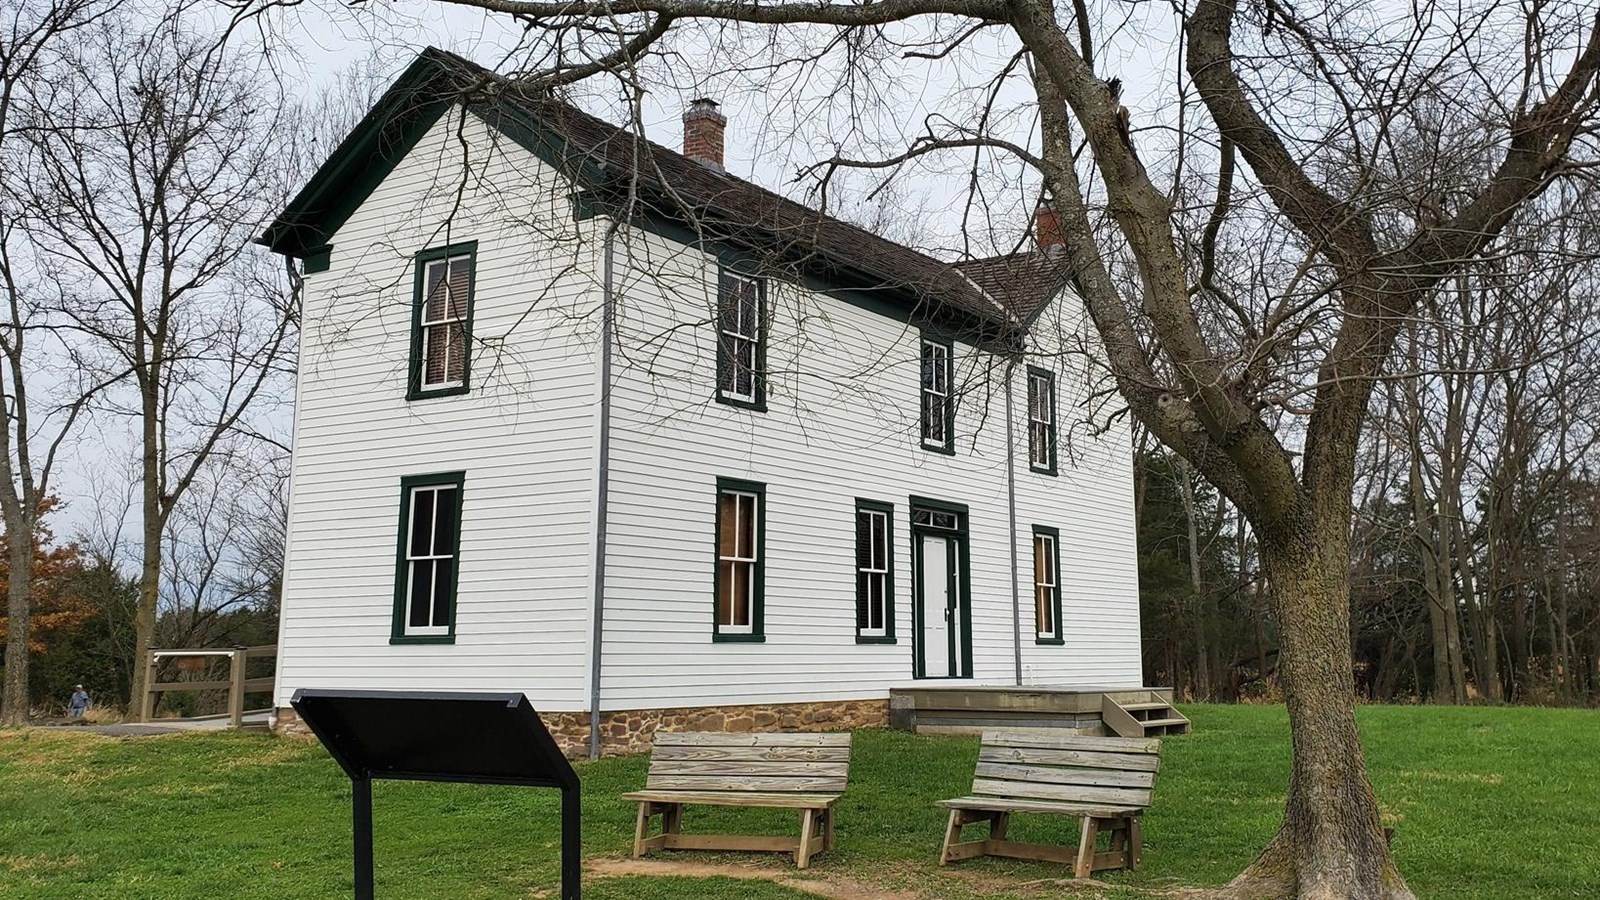 Image of the Brawner Farm Interpretive Center with a lone tree and benches in the foreground